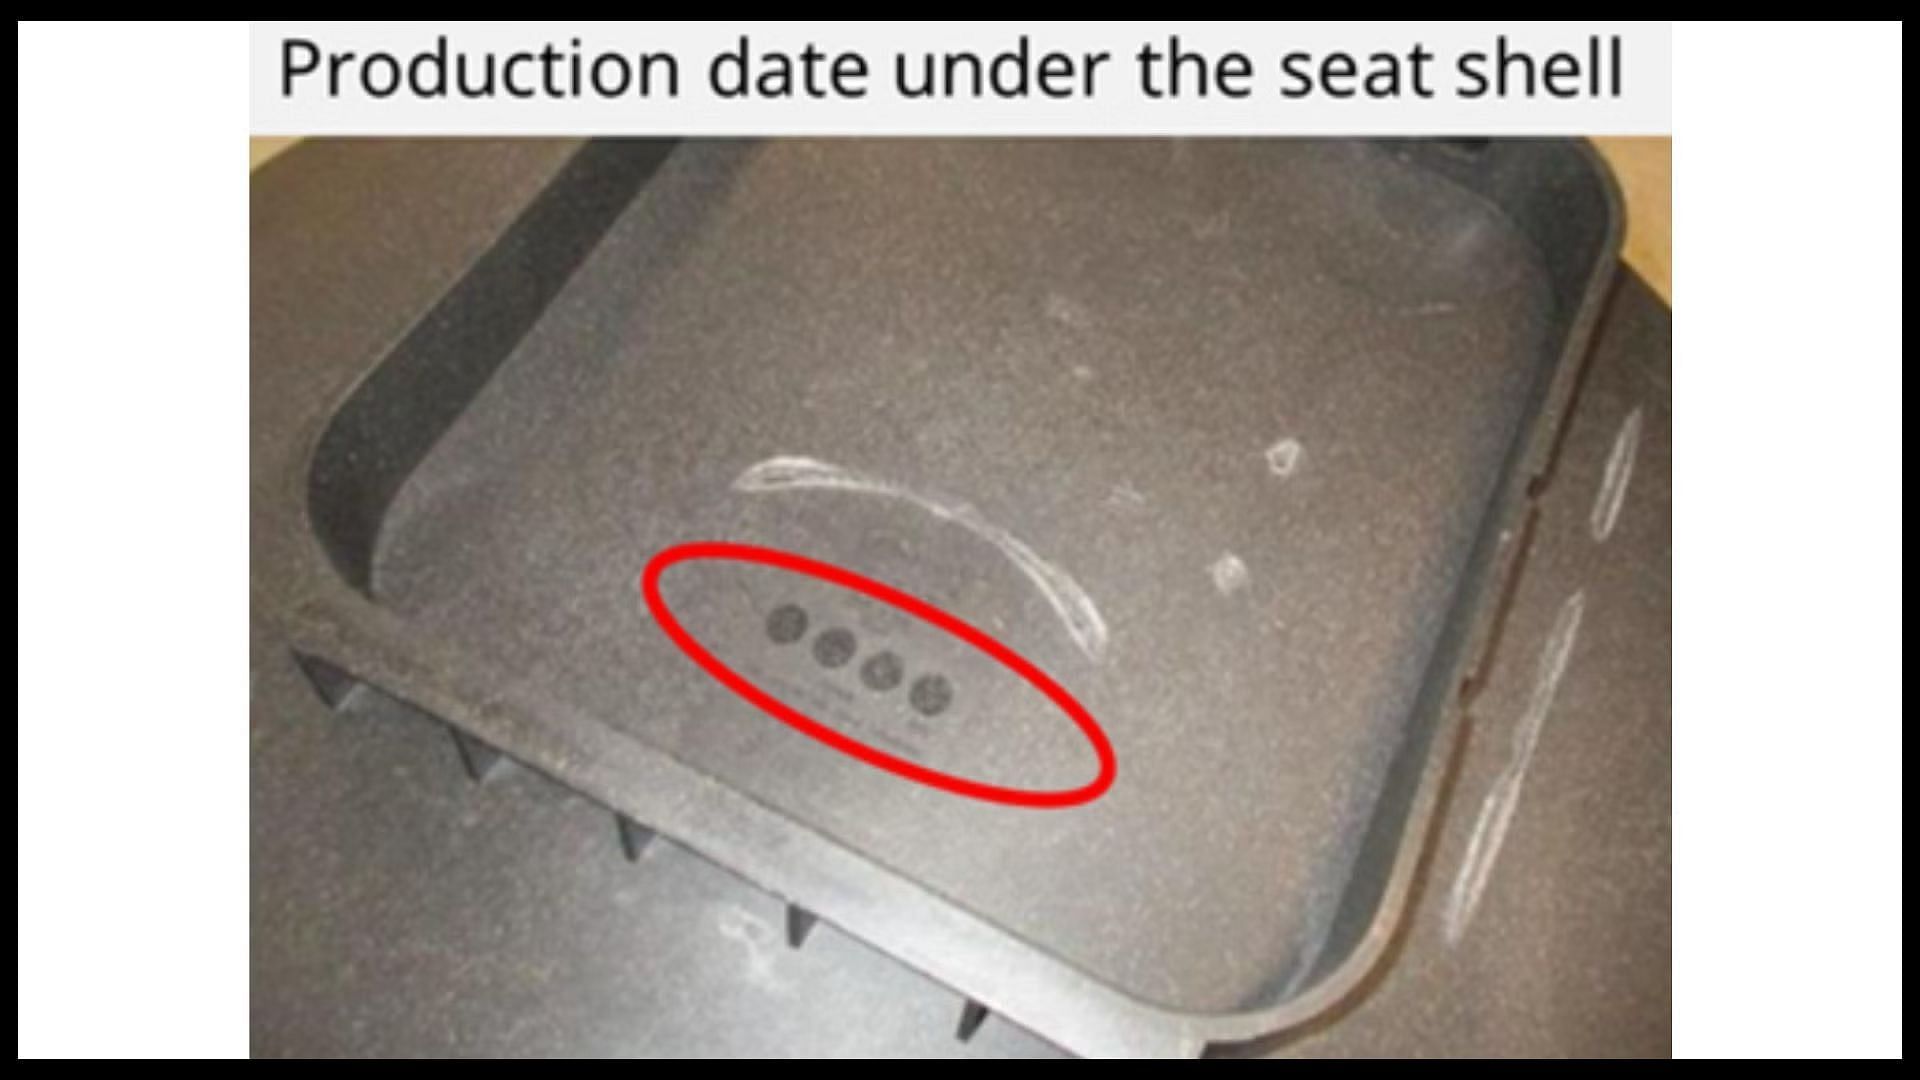 The production date and other details are located under the seat shell of the recalled ODGER Swivel chair (Image via CPSC)